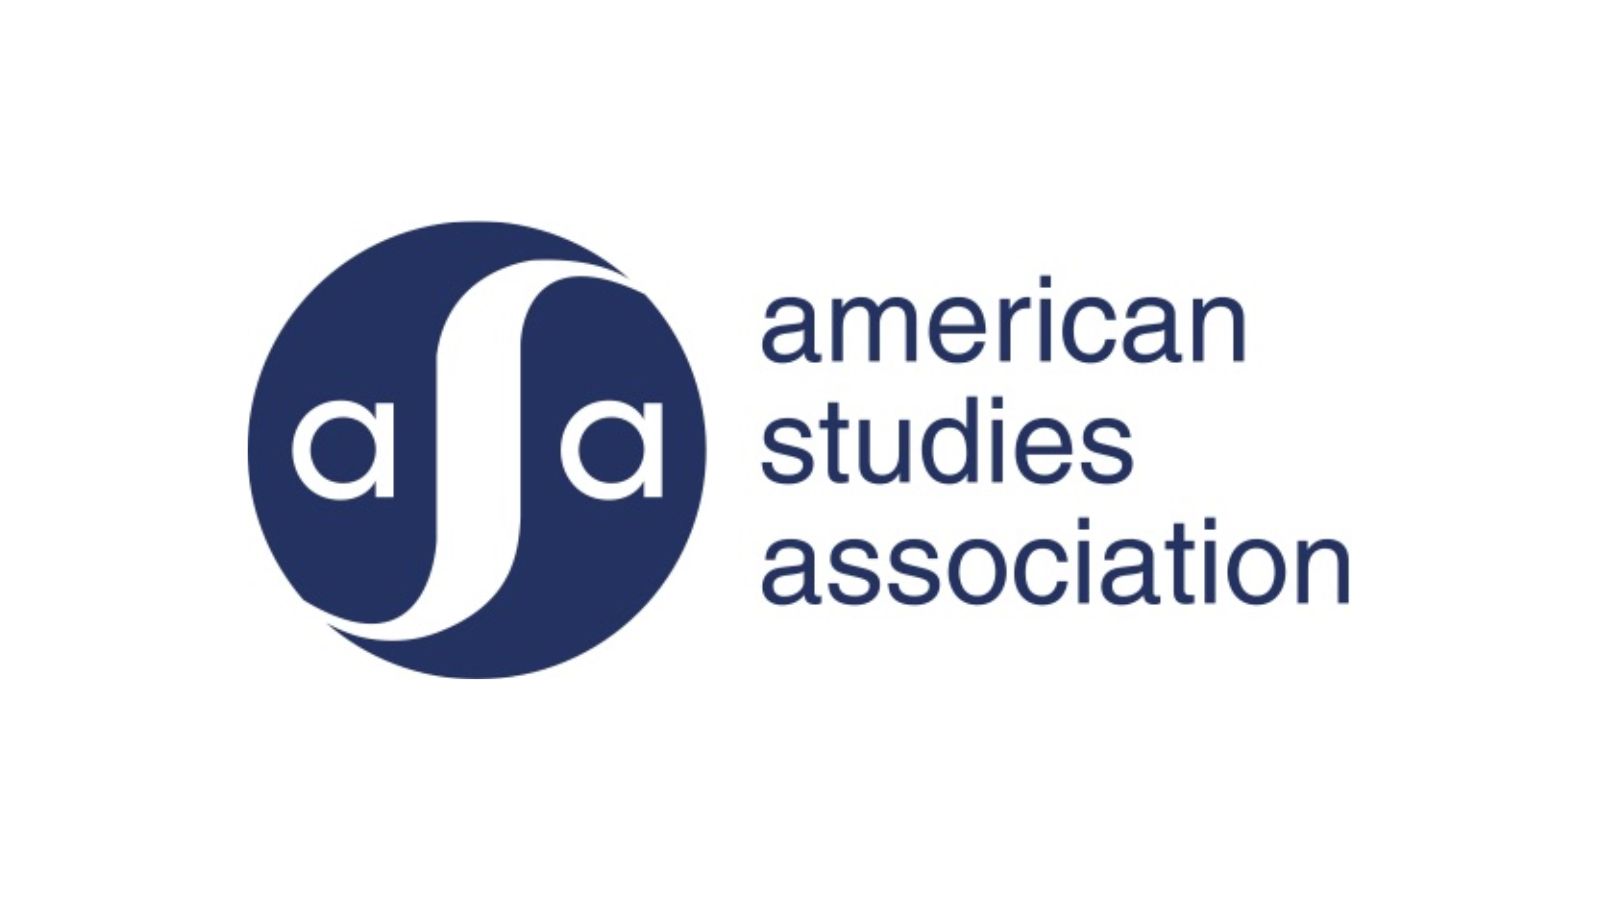 The logo of the American Studies Association